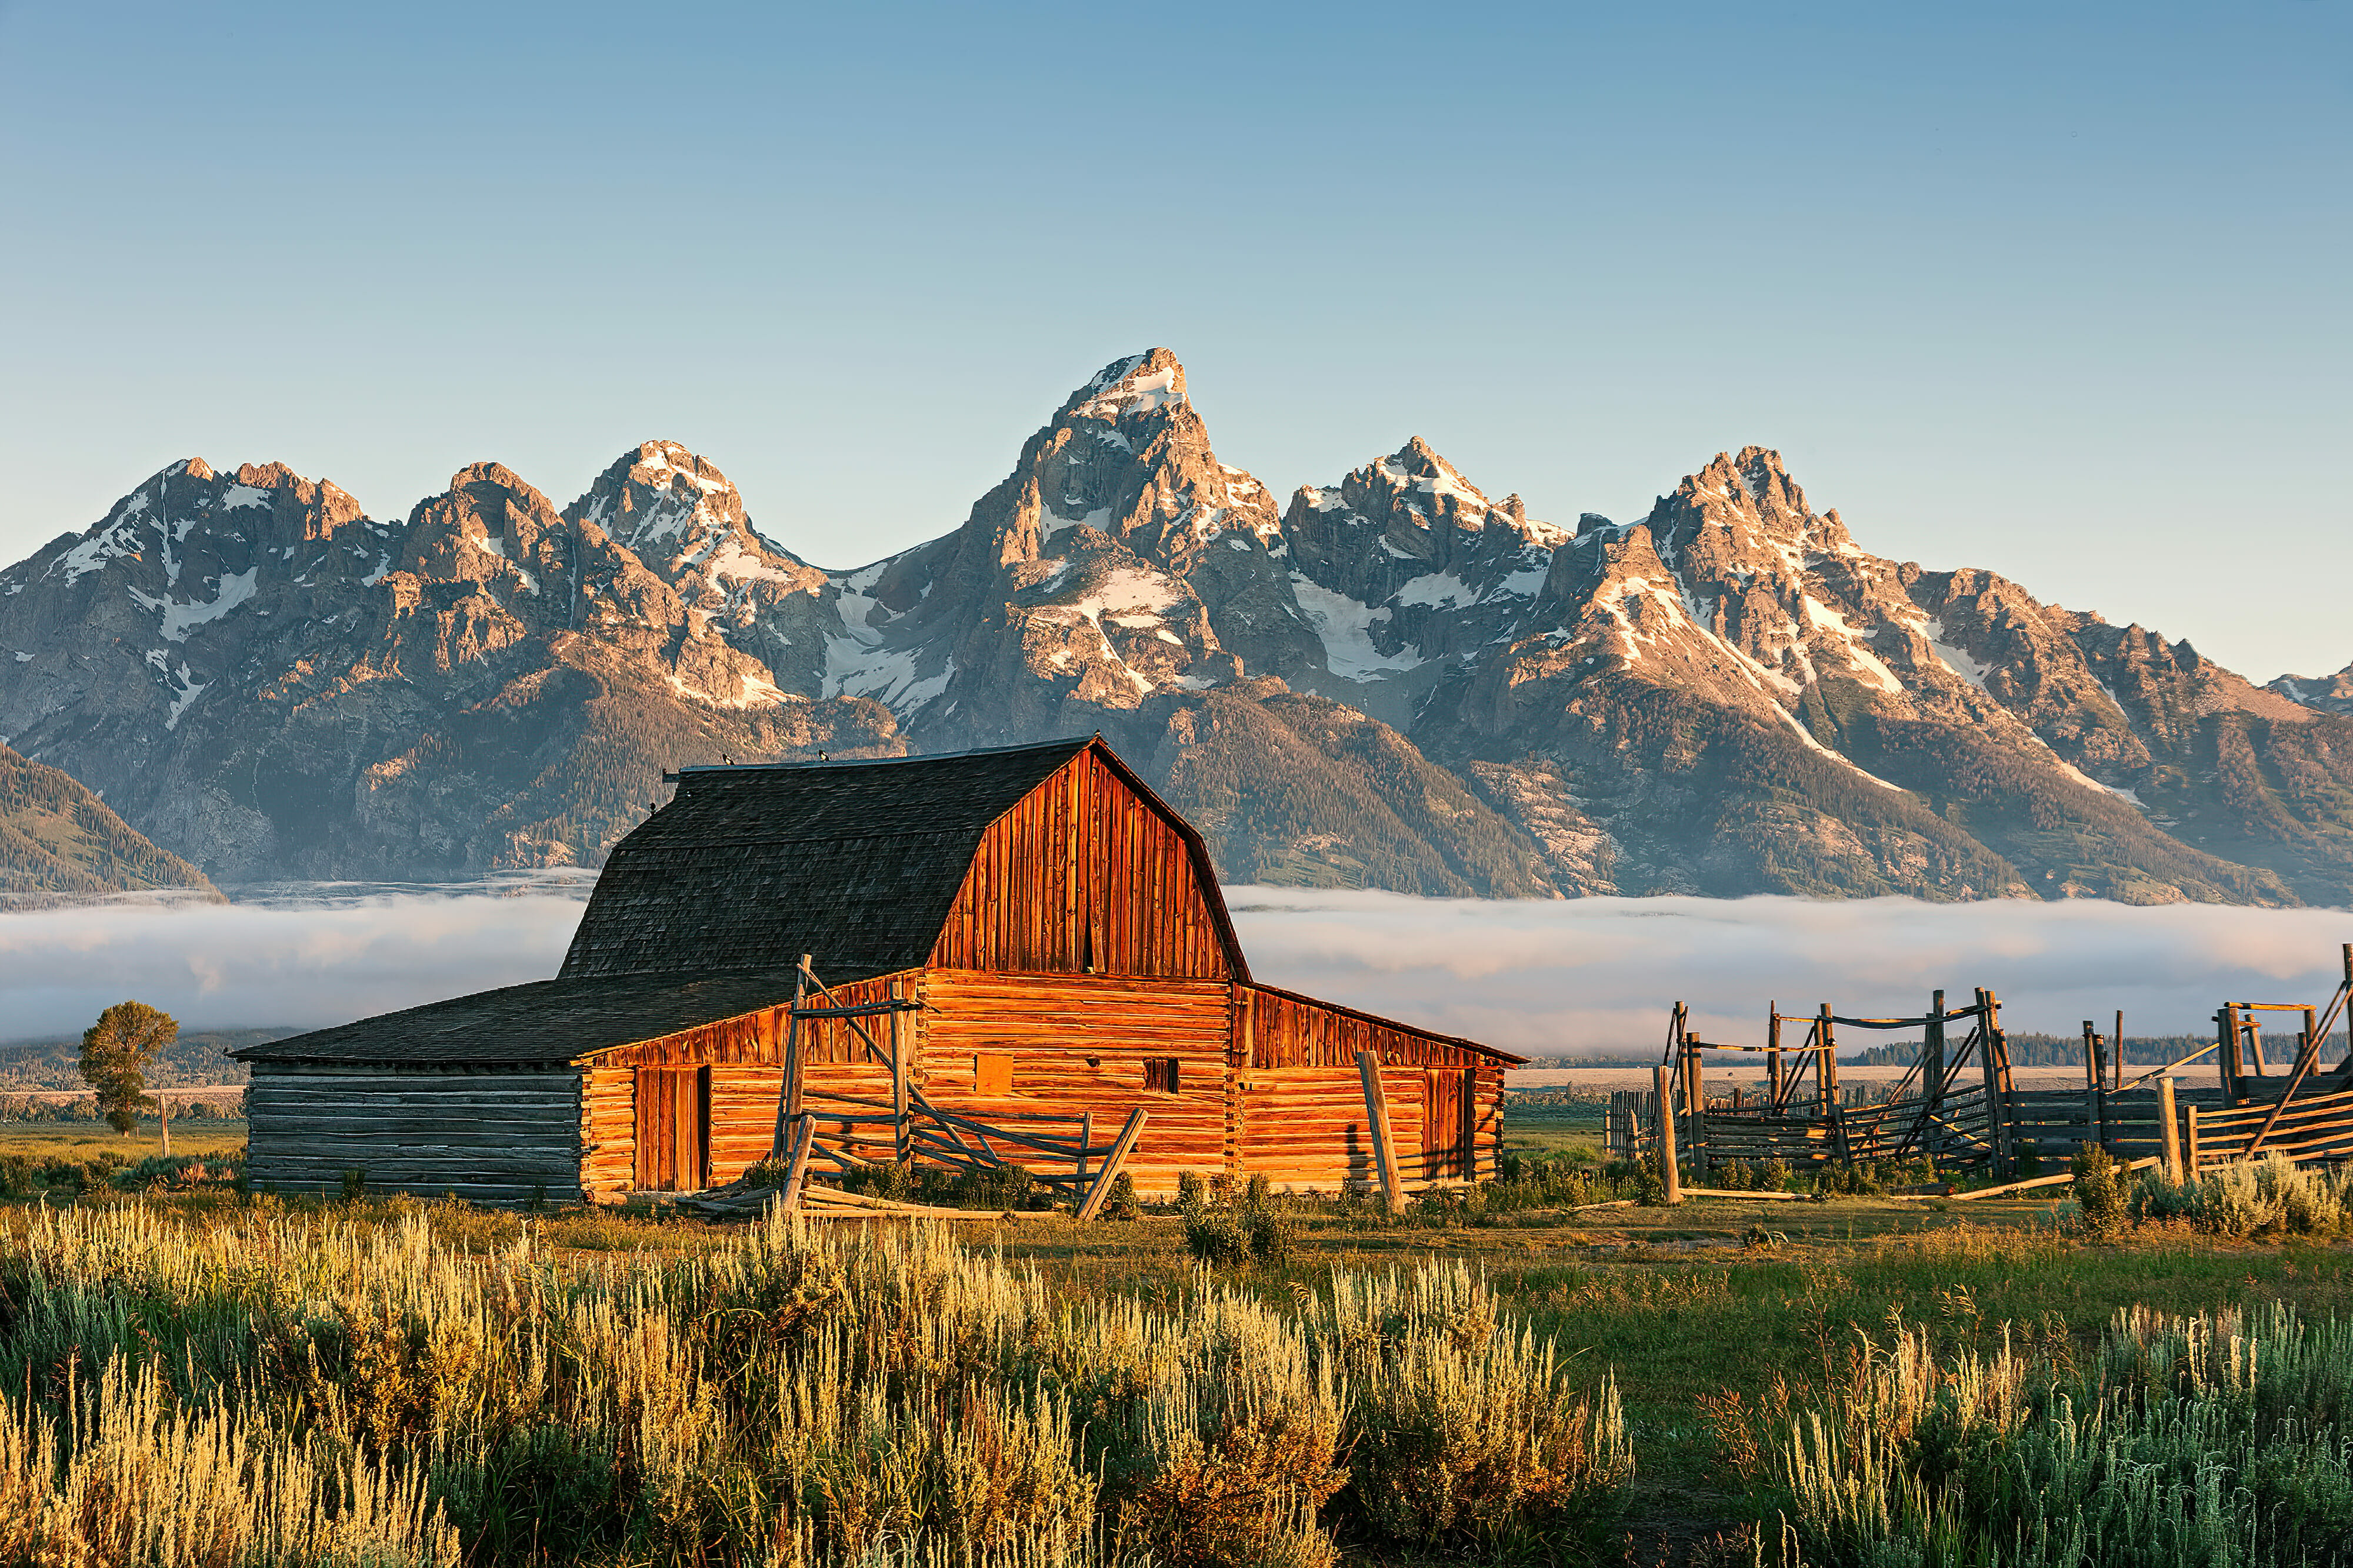 A Sunrise of Moulton Barn in the Grand Teton National Park, WY